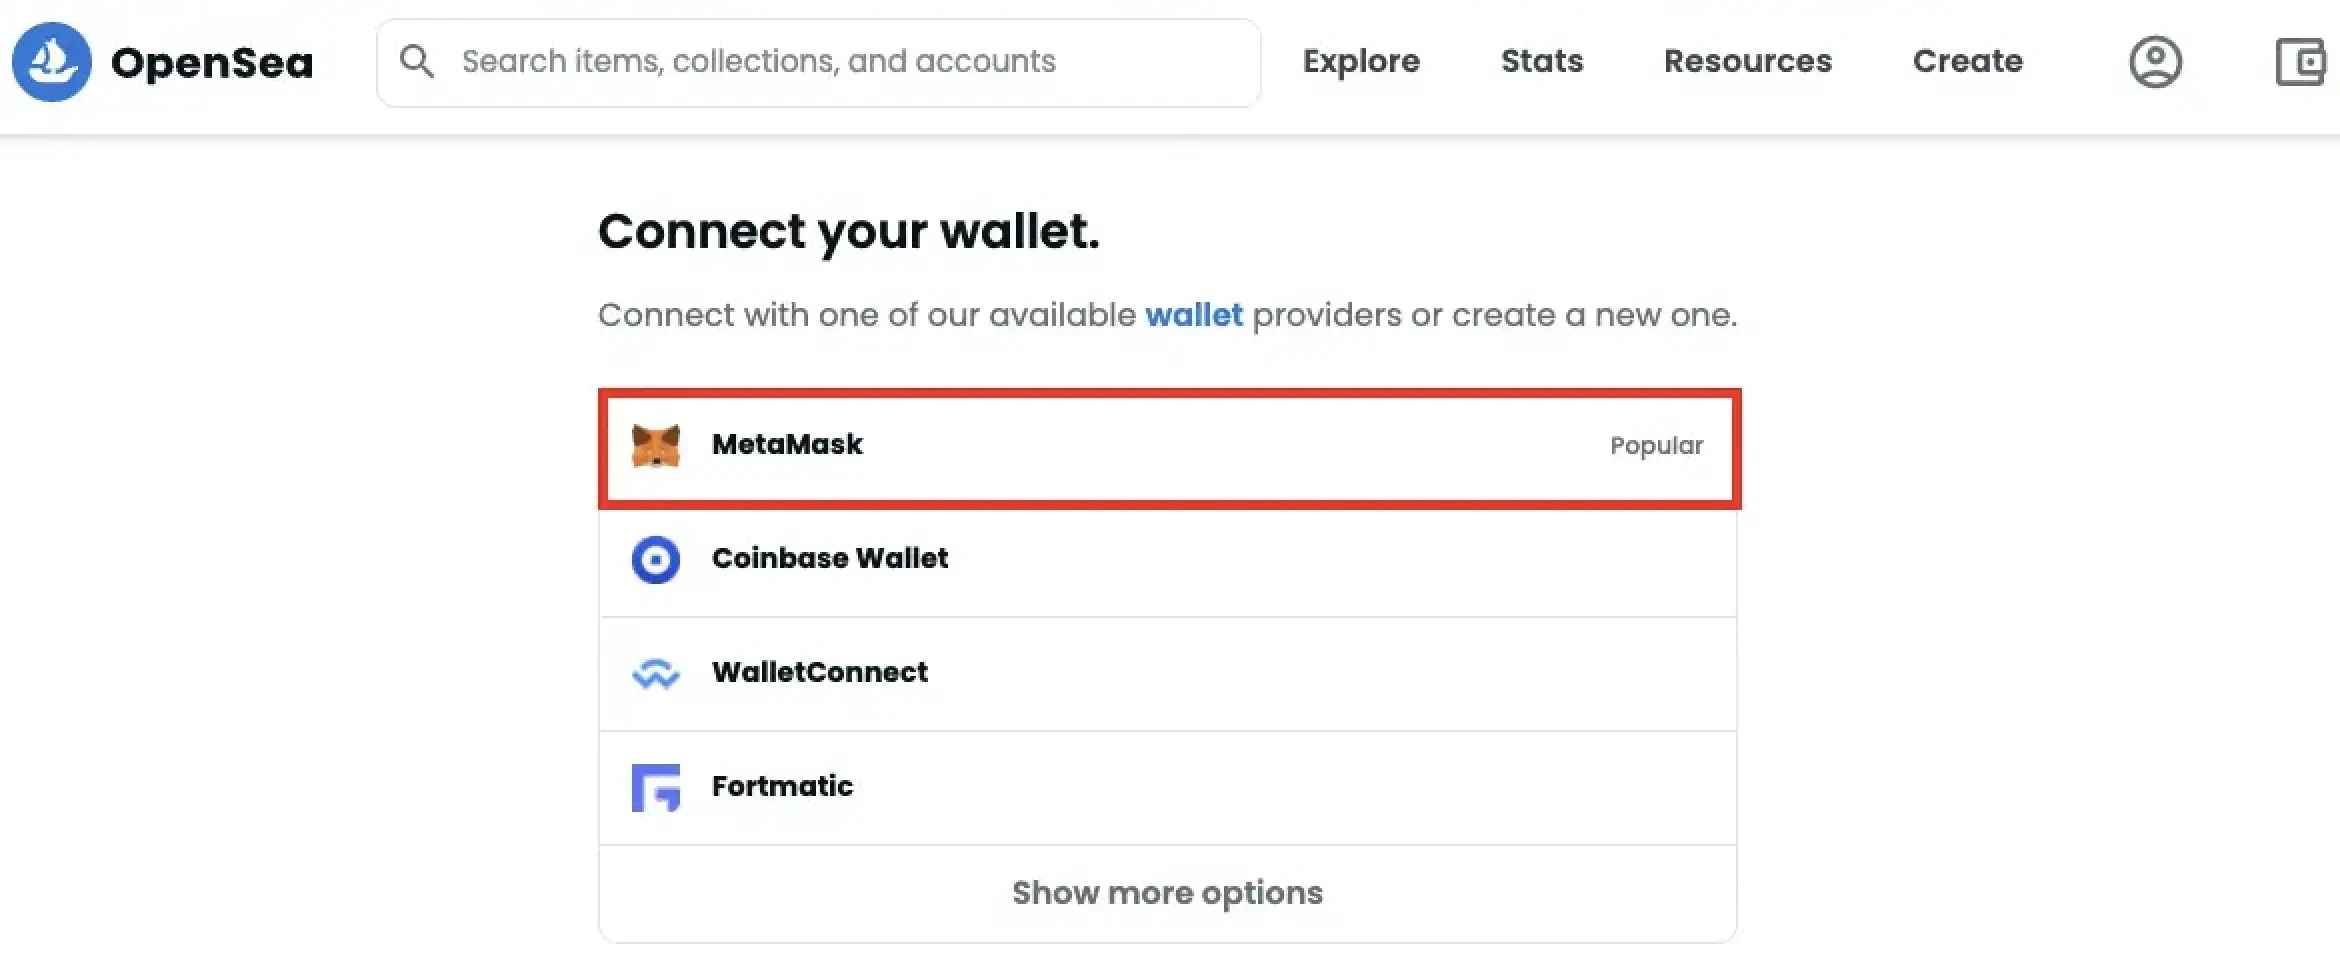 How to connect your wallet on opensea